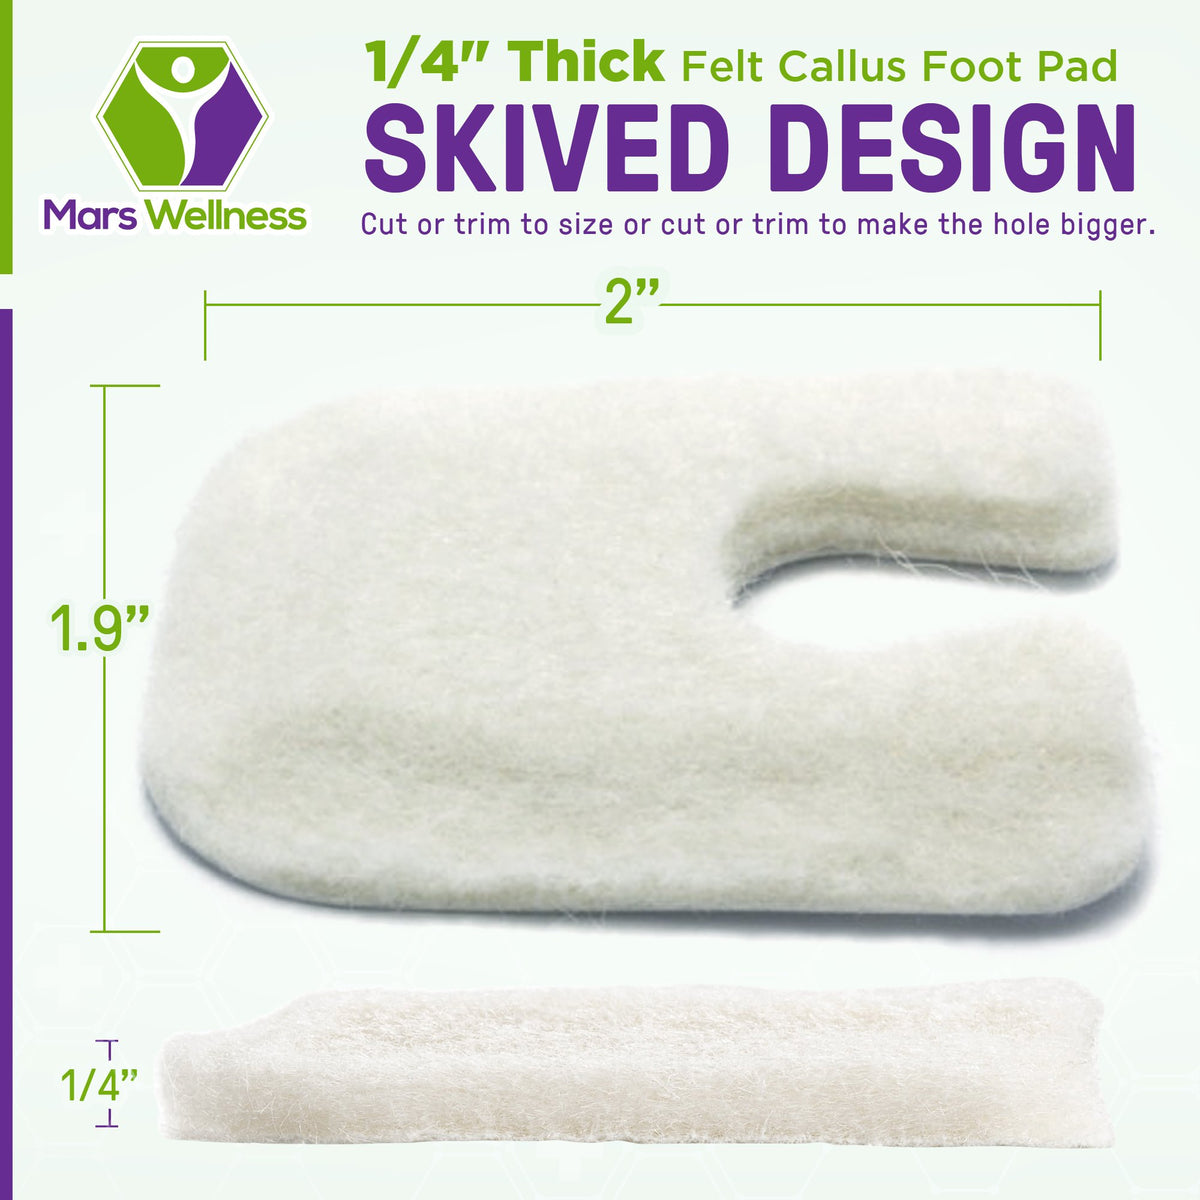 U Shaped Felt Callus Pads - Adhesive Foot Pads That Protect Calluses from Rubbing On Shoes - Skived 1/4"